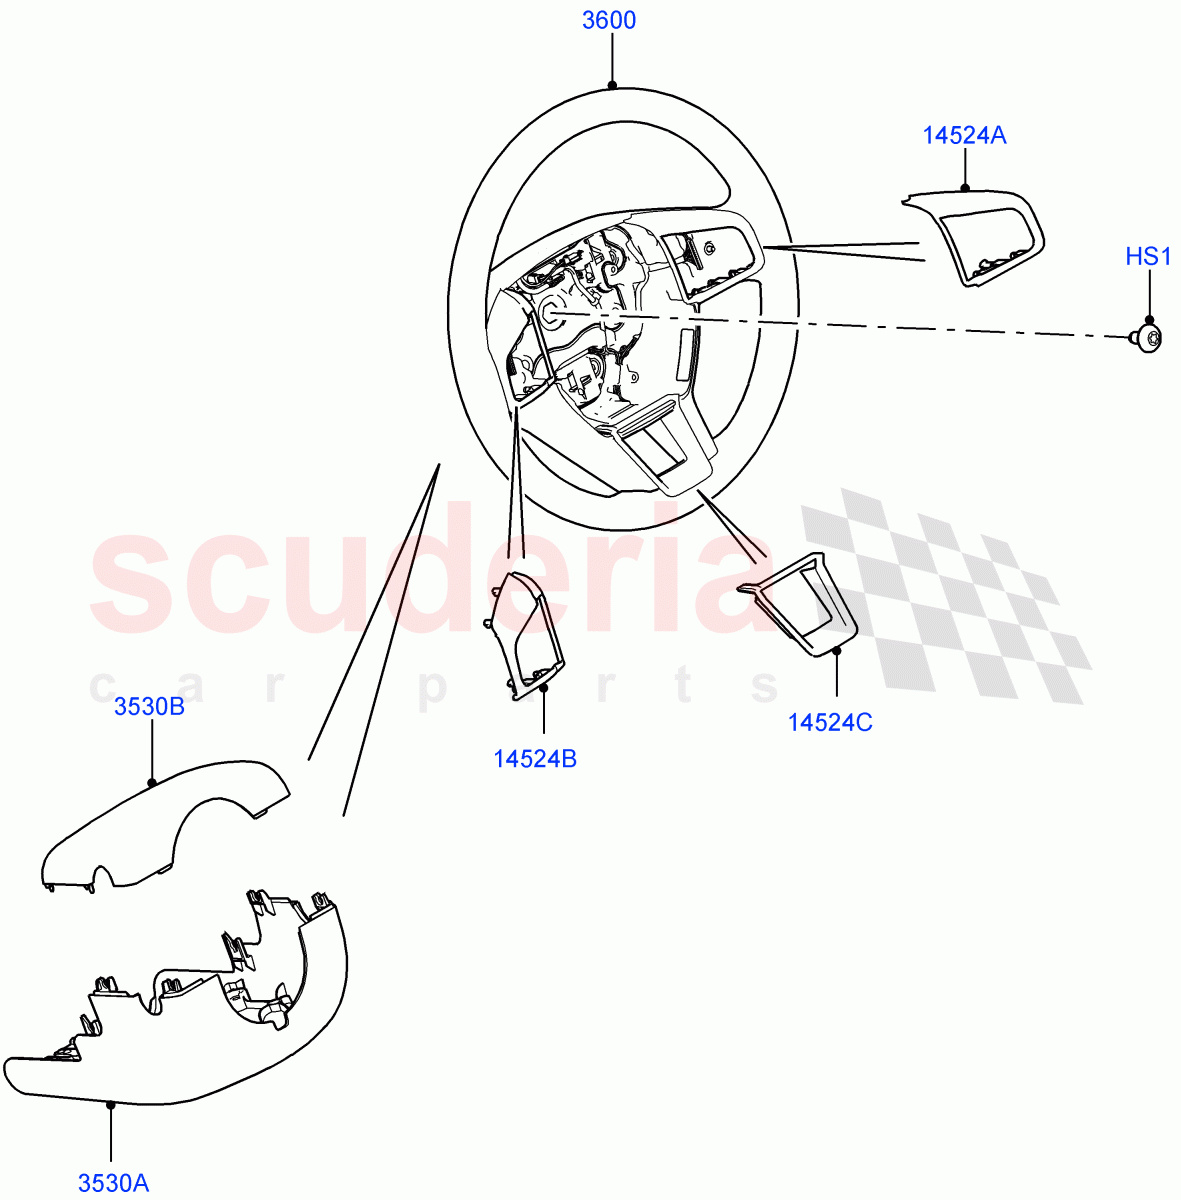 Steering Wheel(Changsu (China))((V)FROMFG000001,(V)TOKG446856) of Land Rover Land Rover Discovery Sport (2015+) [2.2 Single Turbo Diesel]